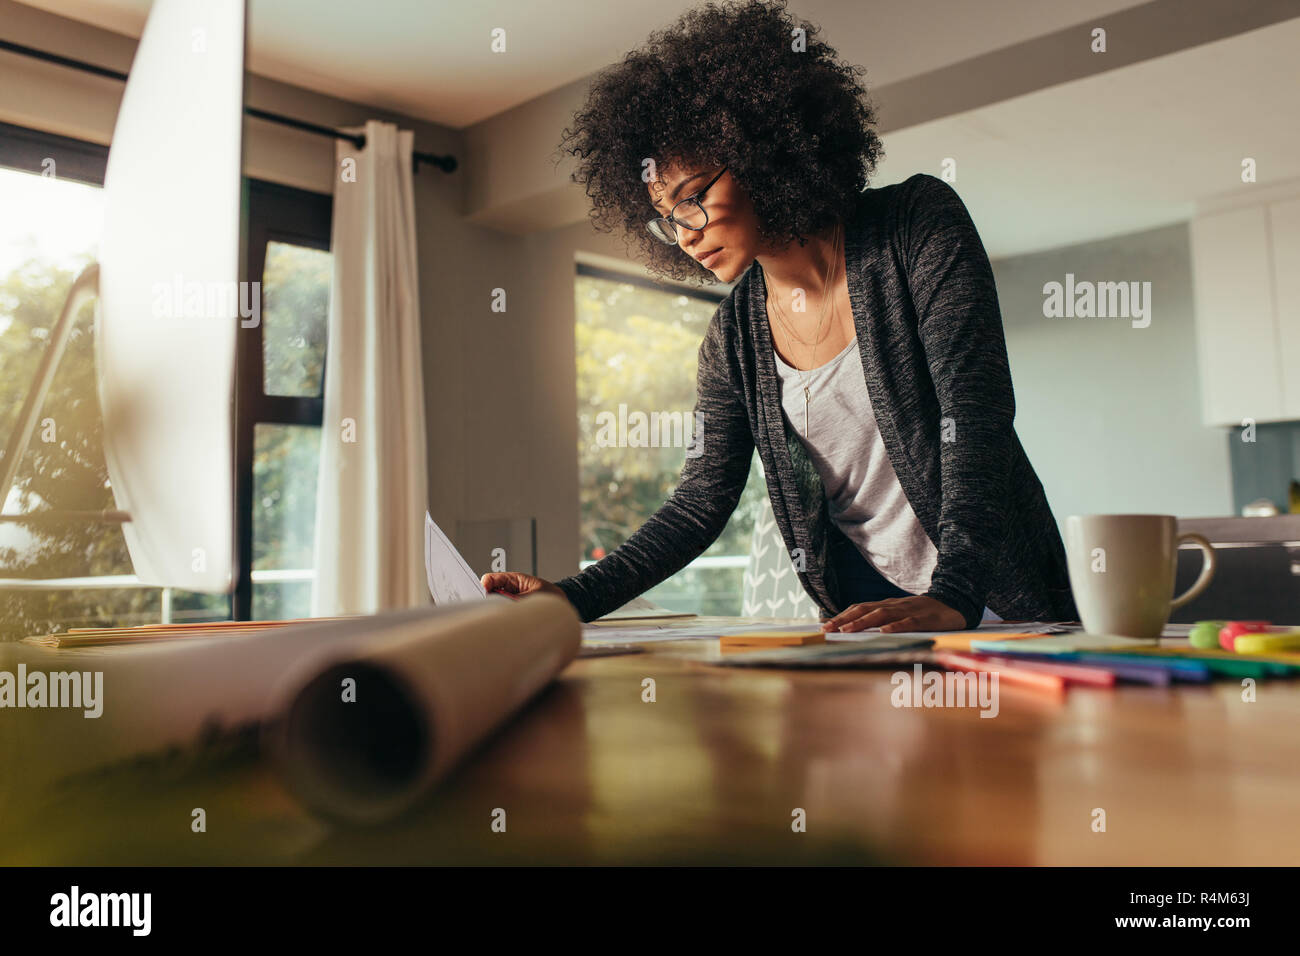 Female designer working on a new project. Woman with curly hair reviewing a design at home office. Stock Photo